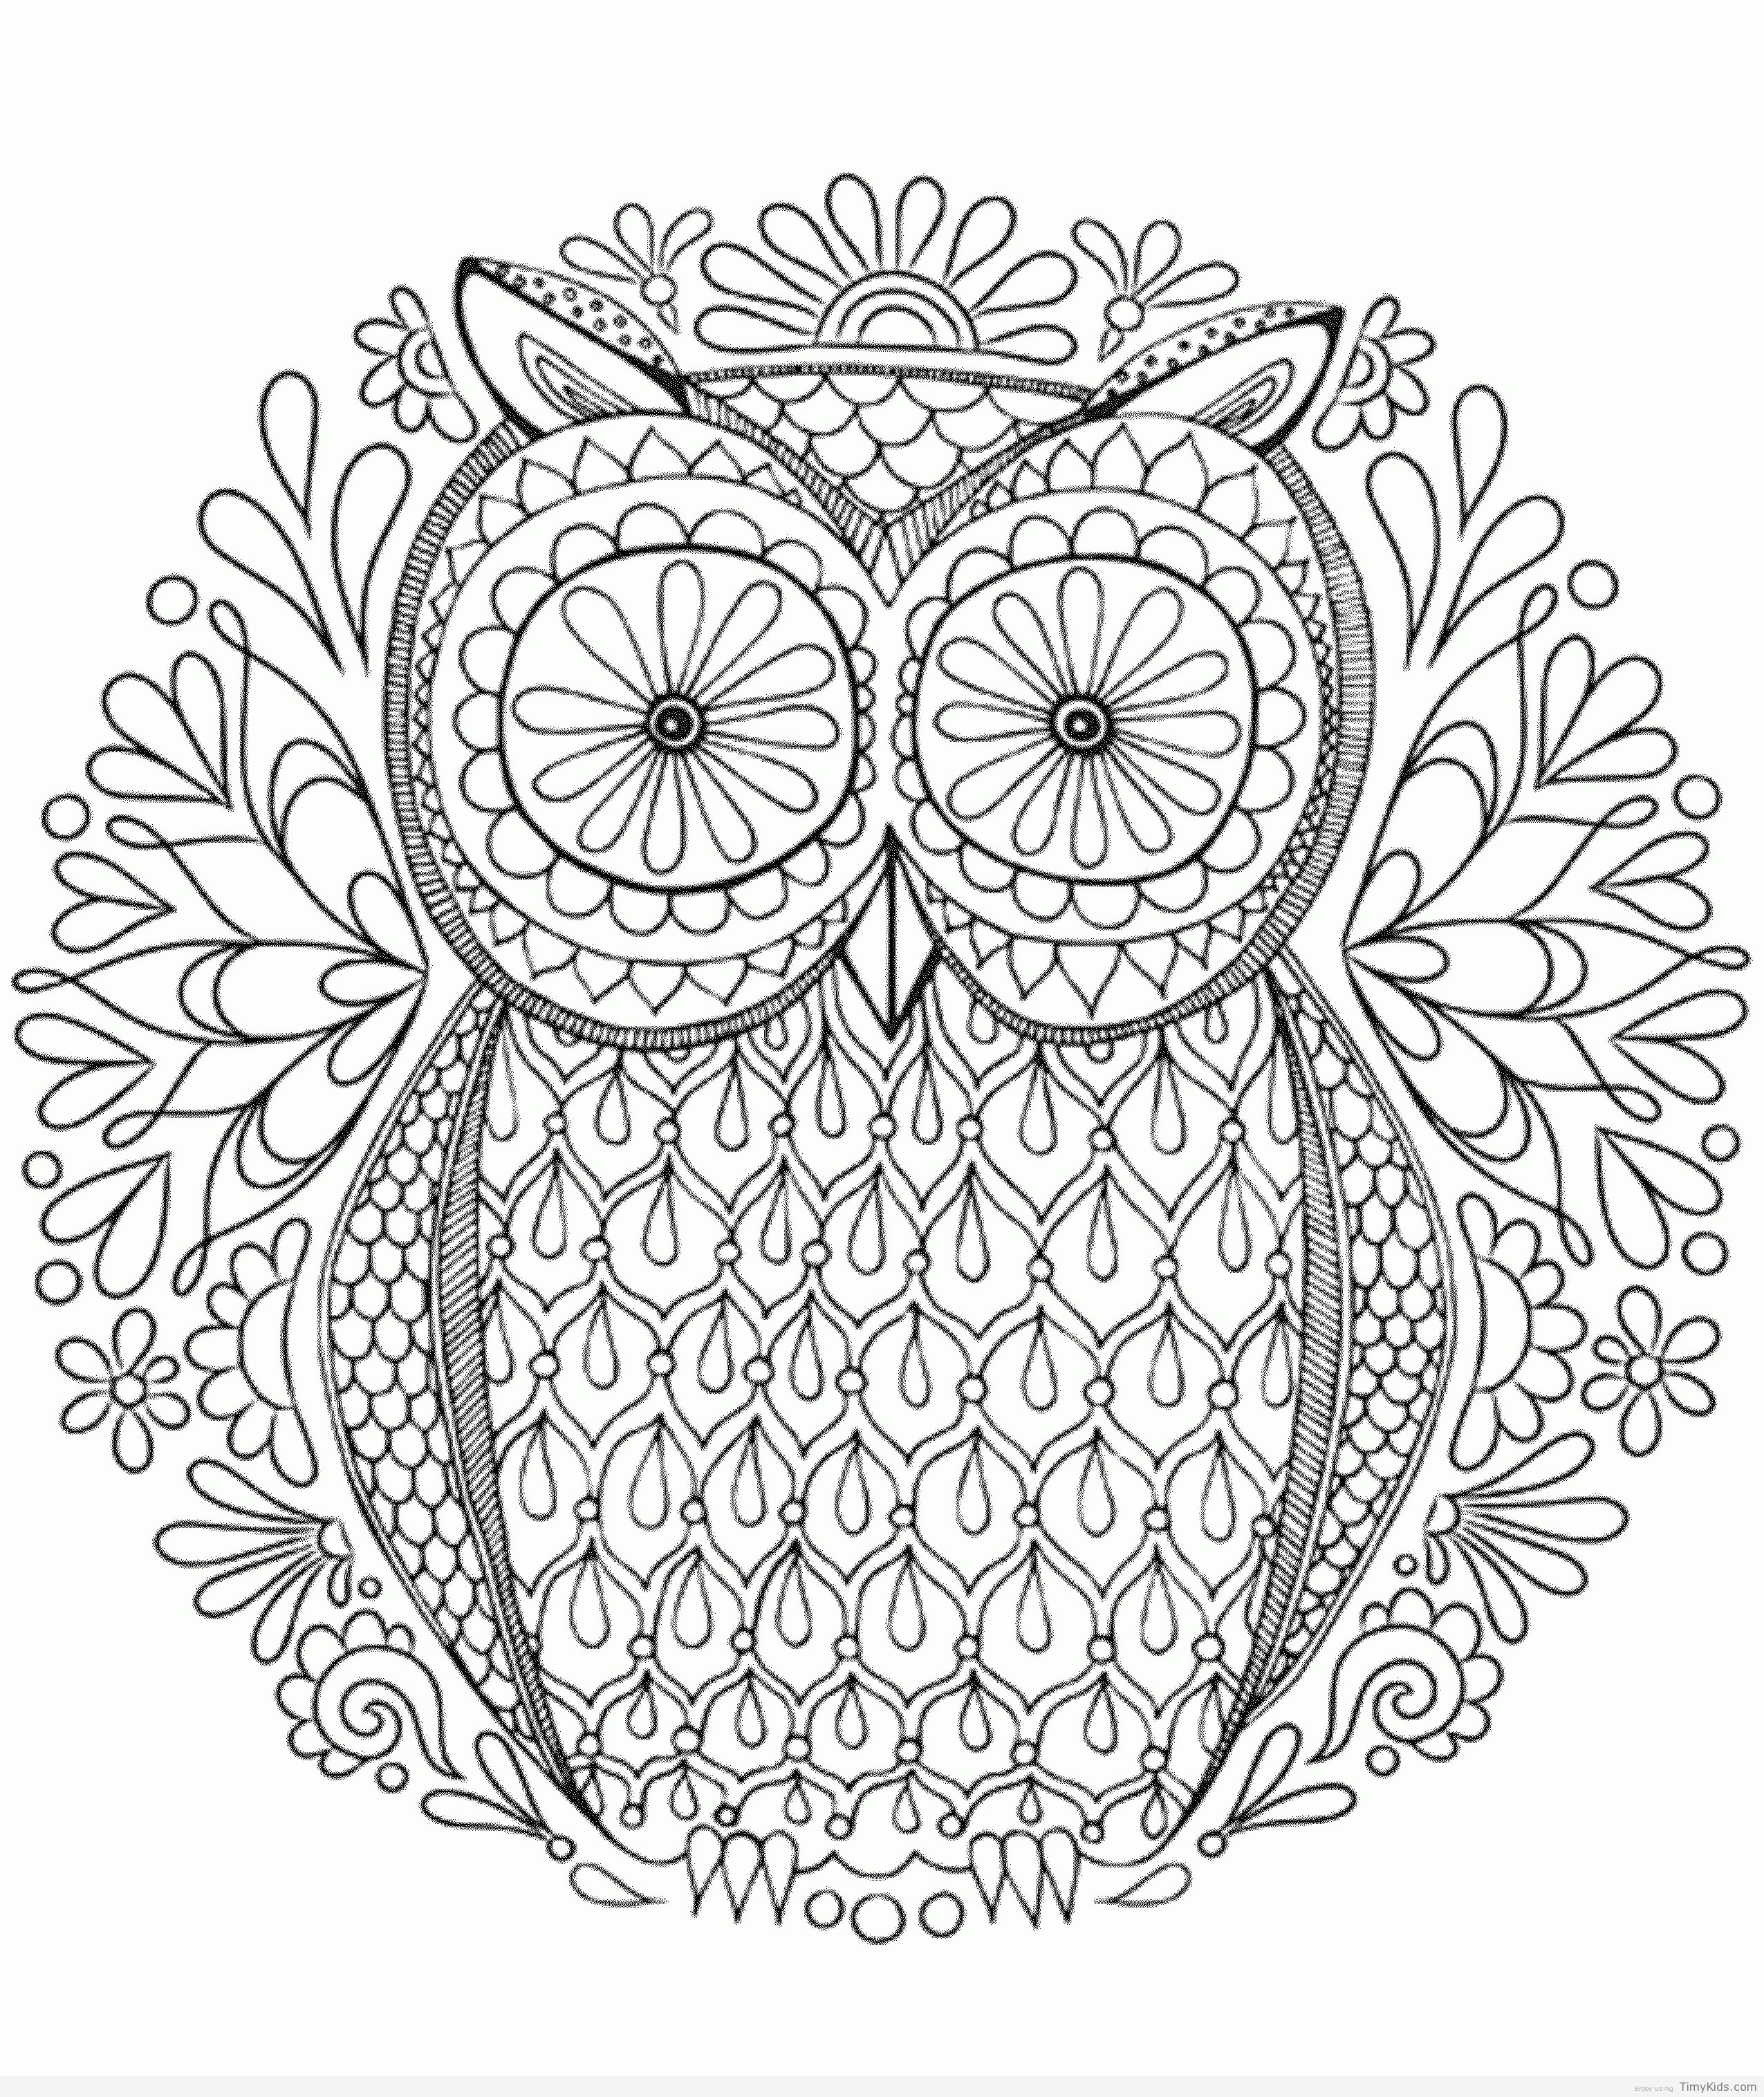 Coloring Ideas : Freee Hard Coloring Pages For Adults Kids Save - Free Printable Hard Coloring Pages For Adults